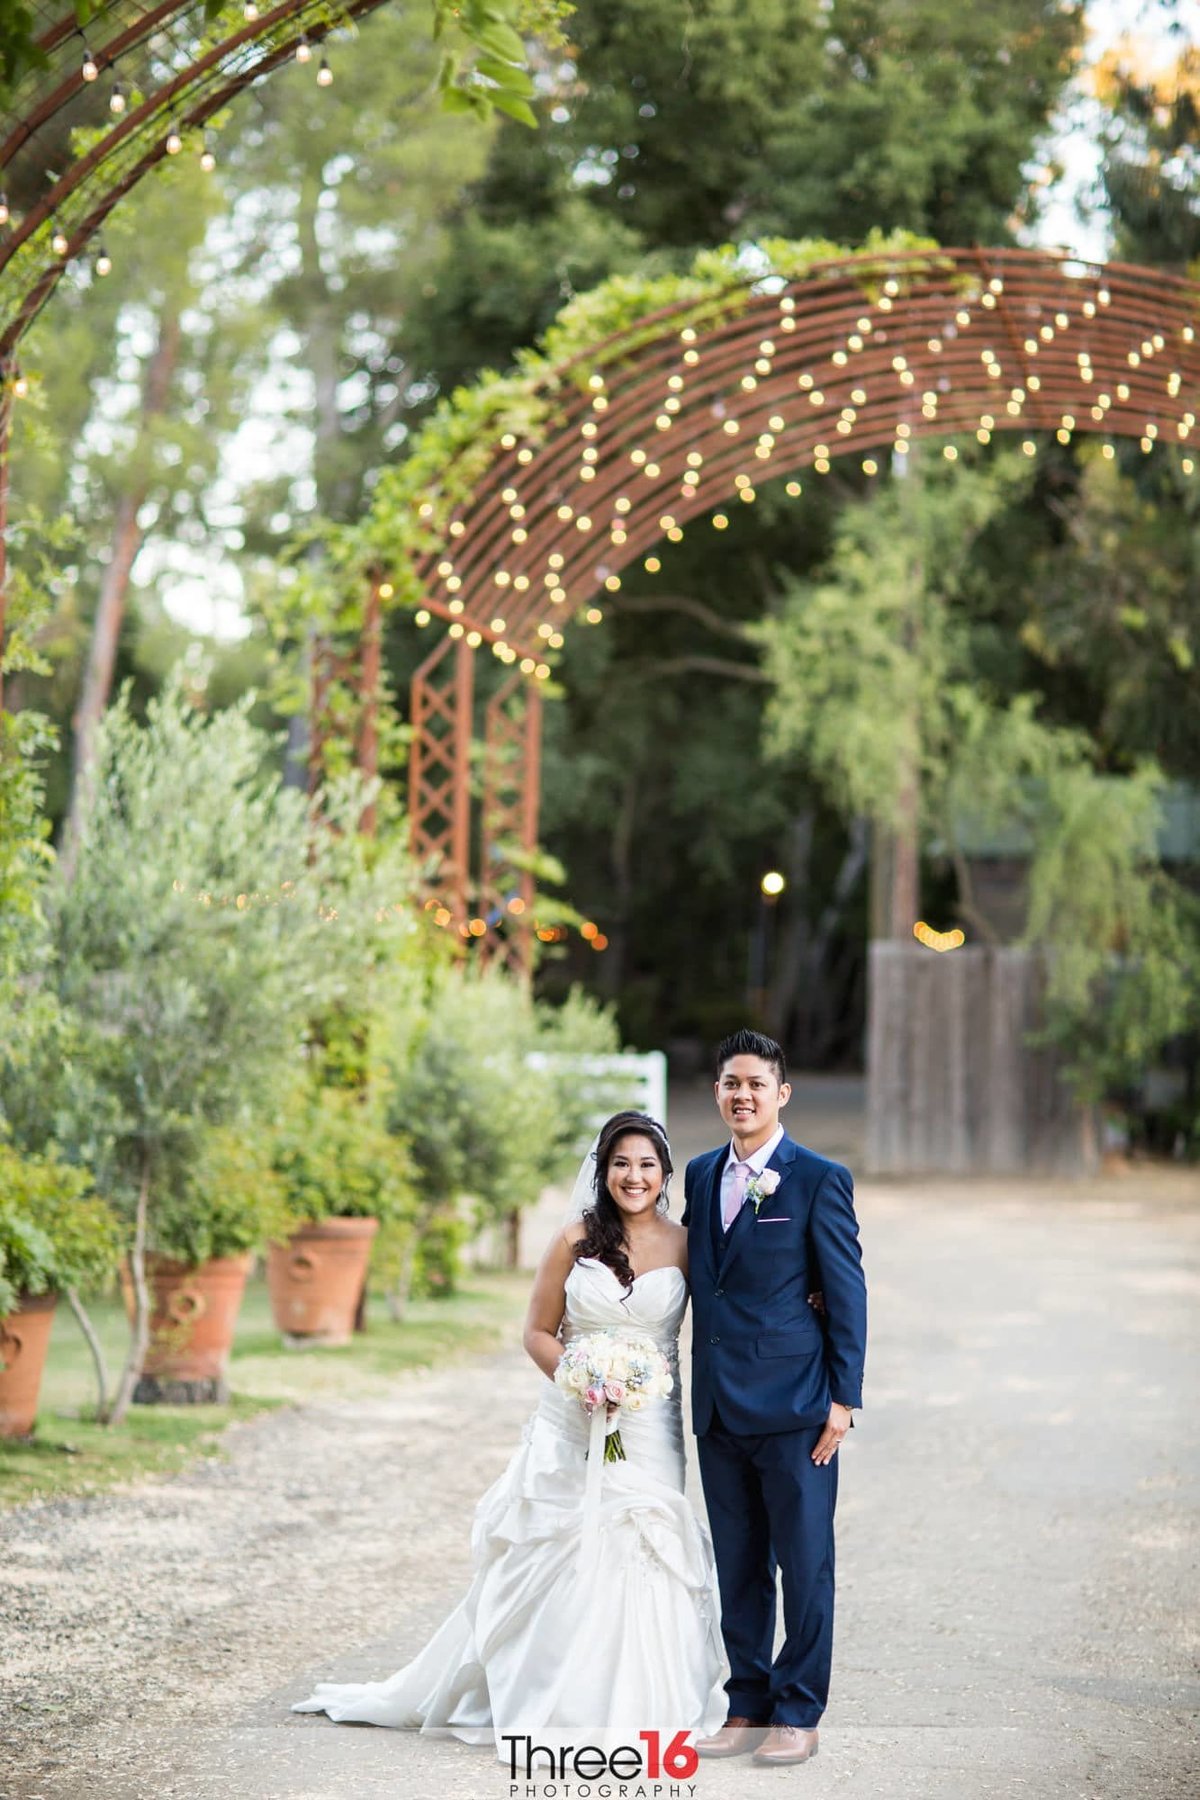 Bride and Groom stand next to each other as they pose for photos under the large archway at the Calamigos Ranch